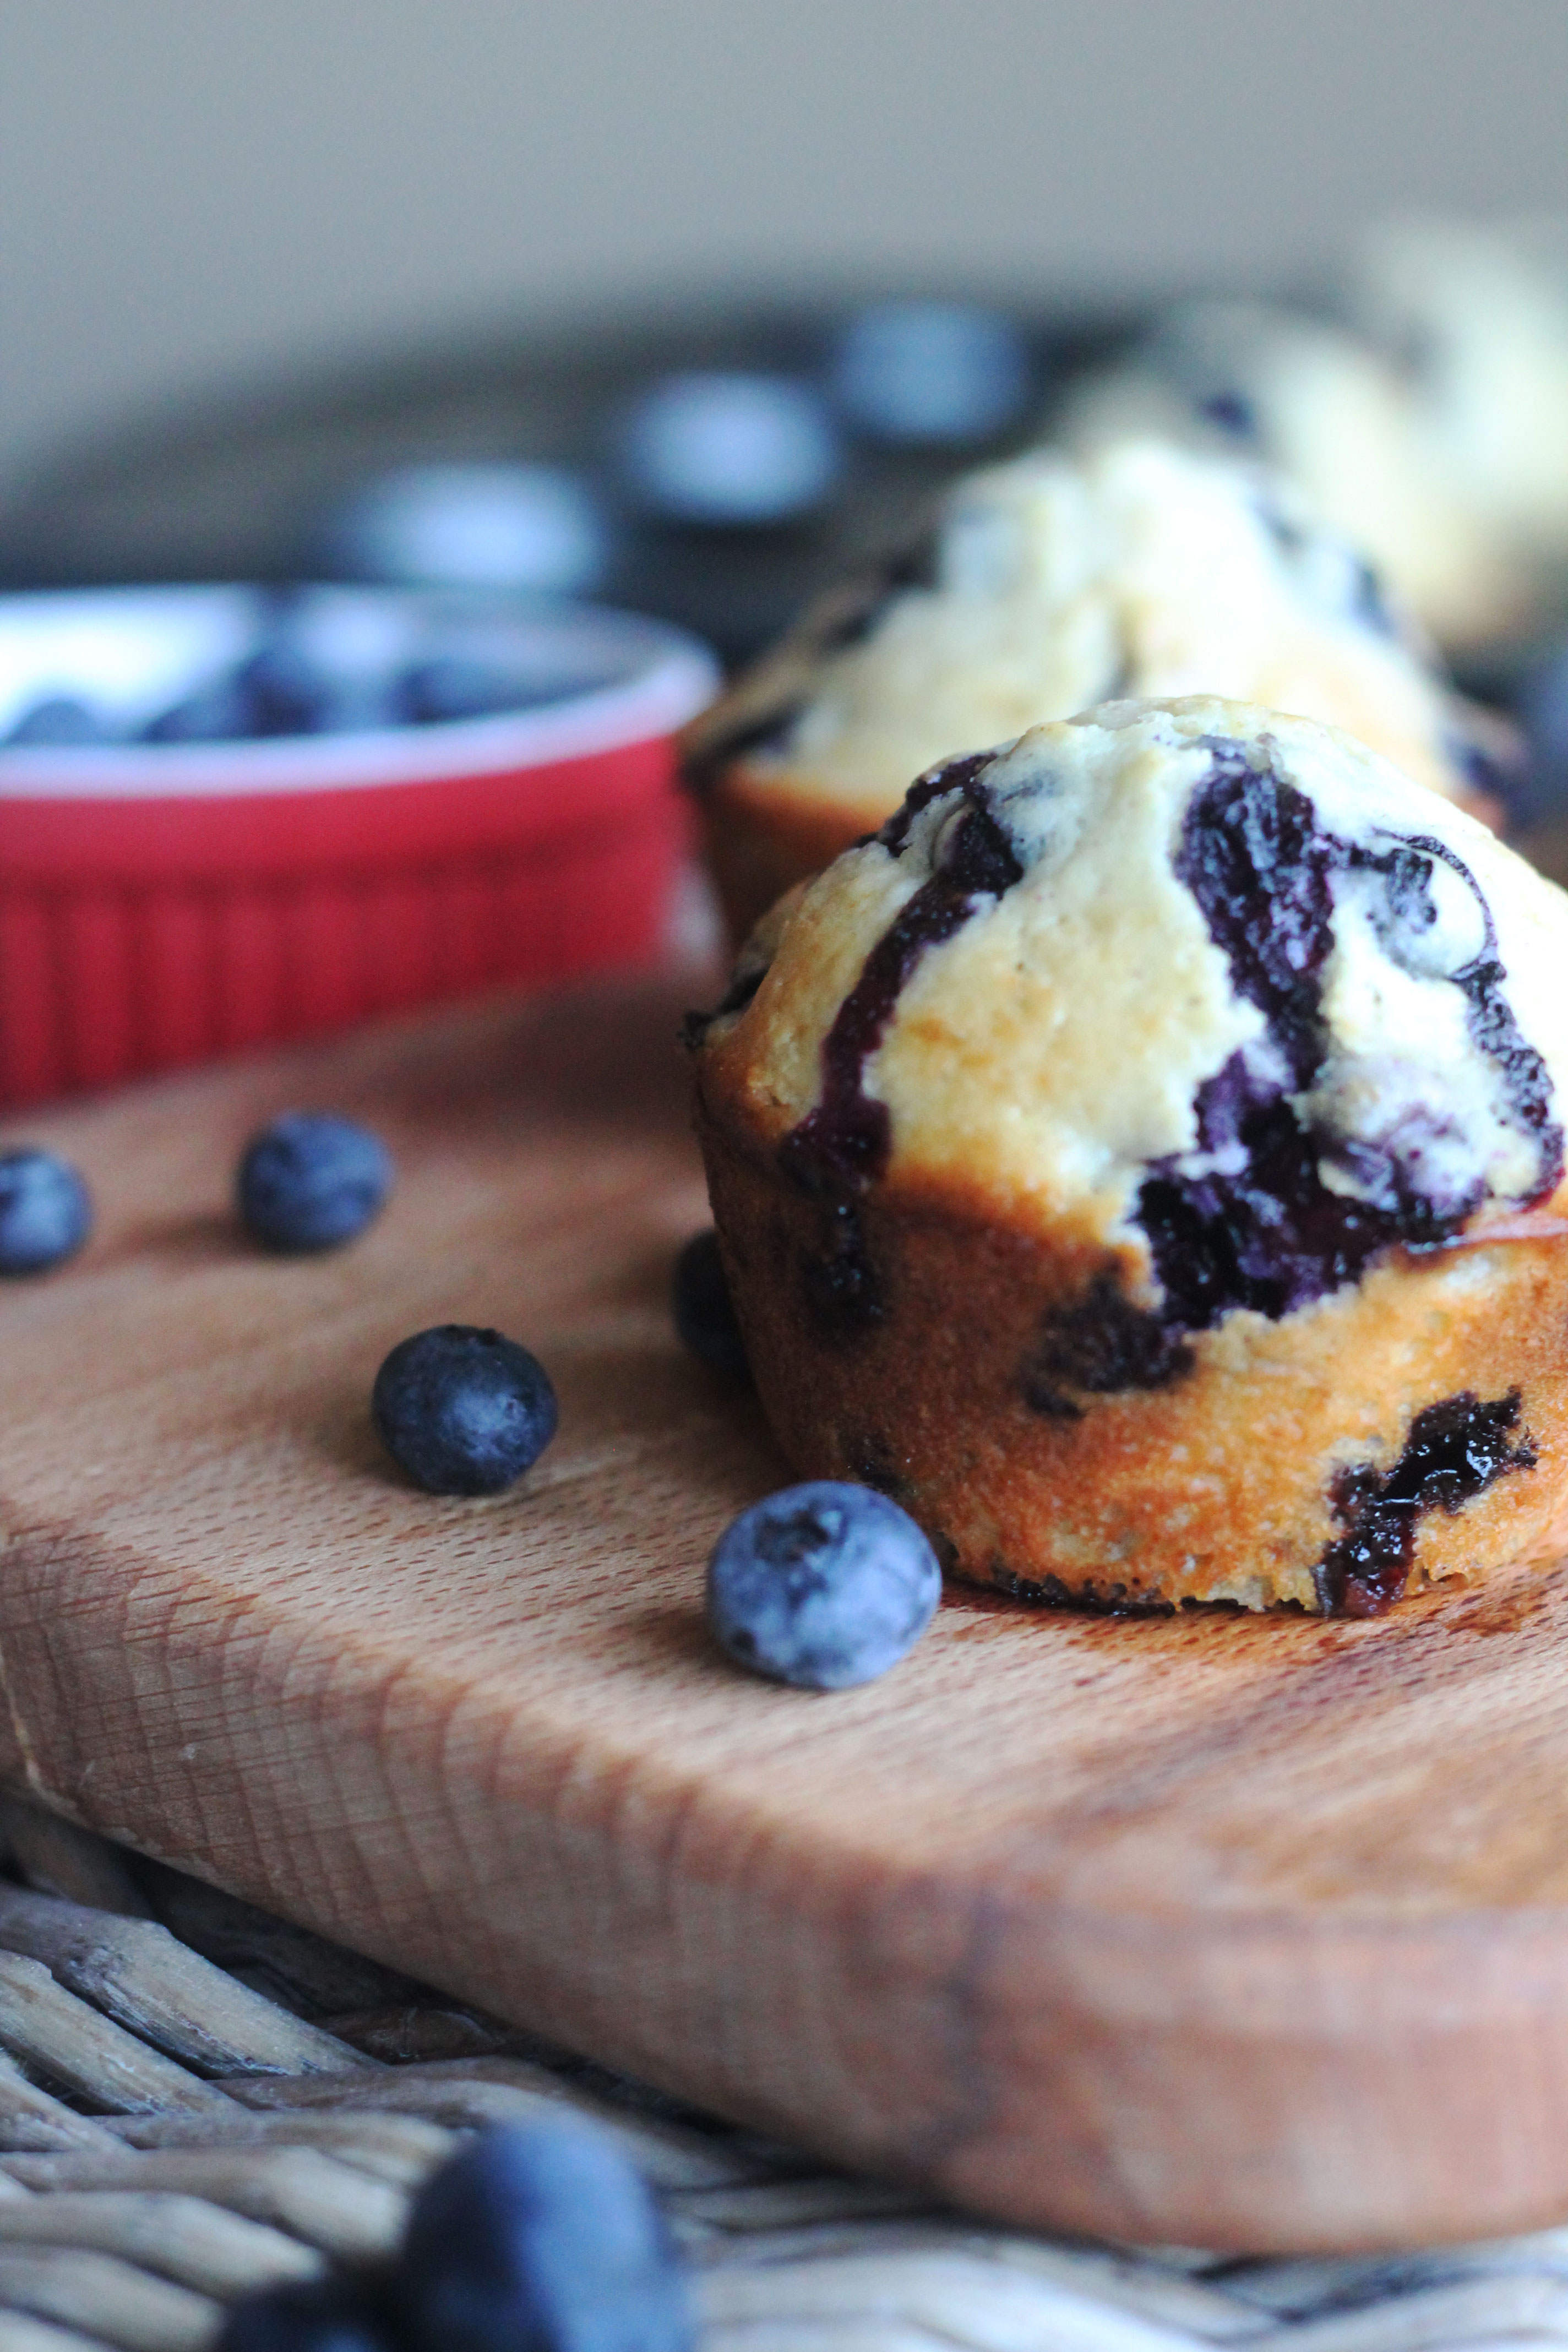 Everyone needs this Blueberry Muffin recipe in their home